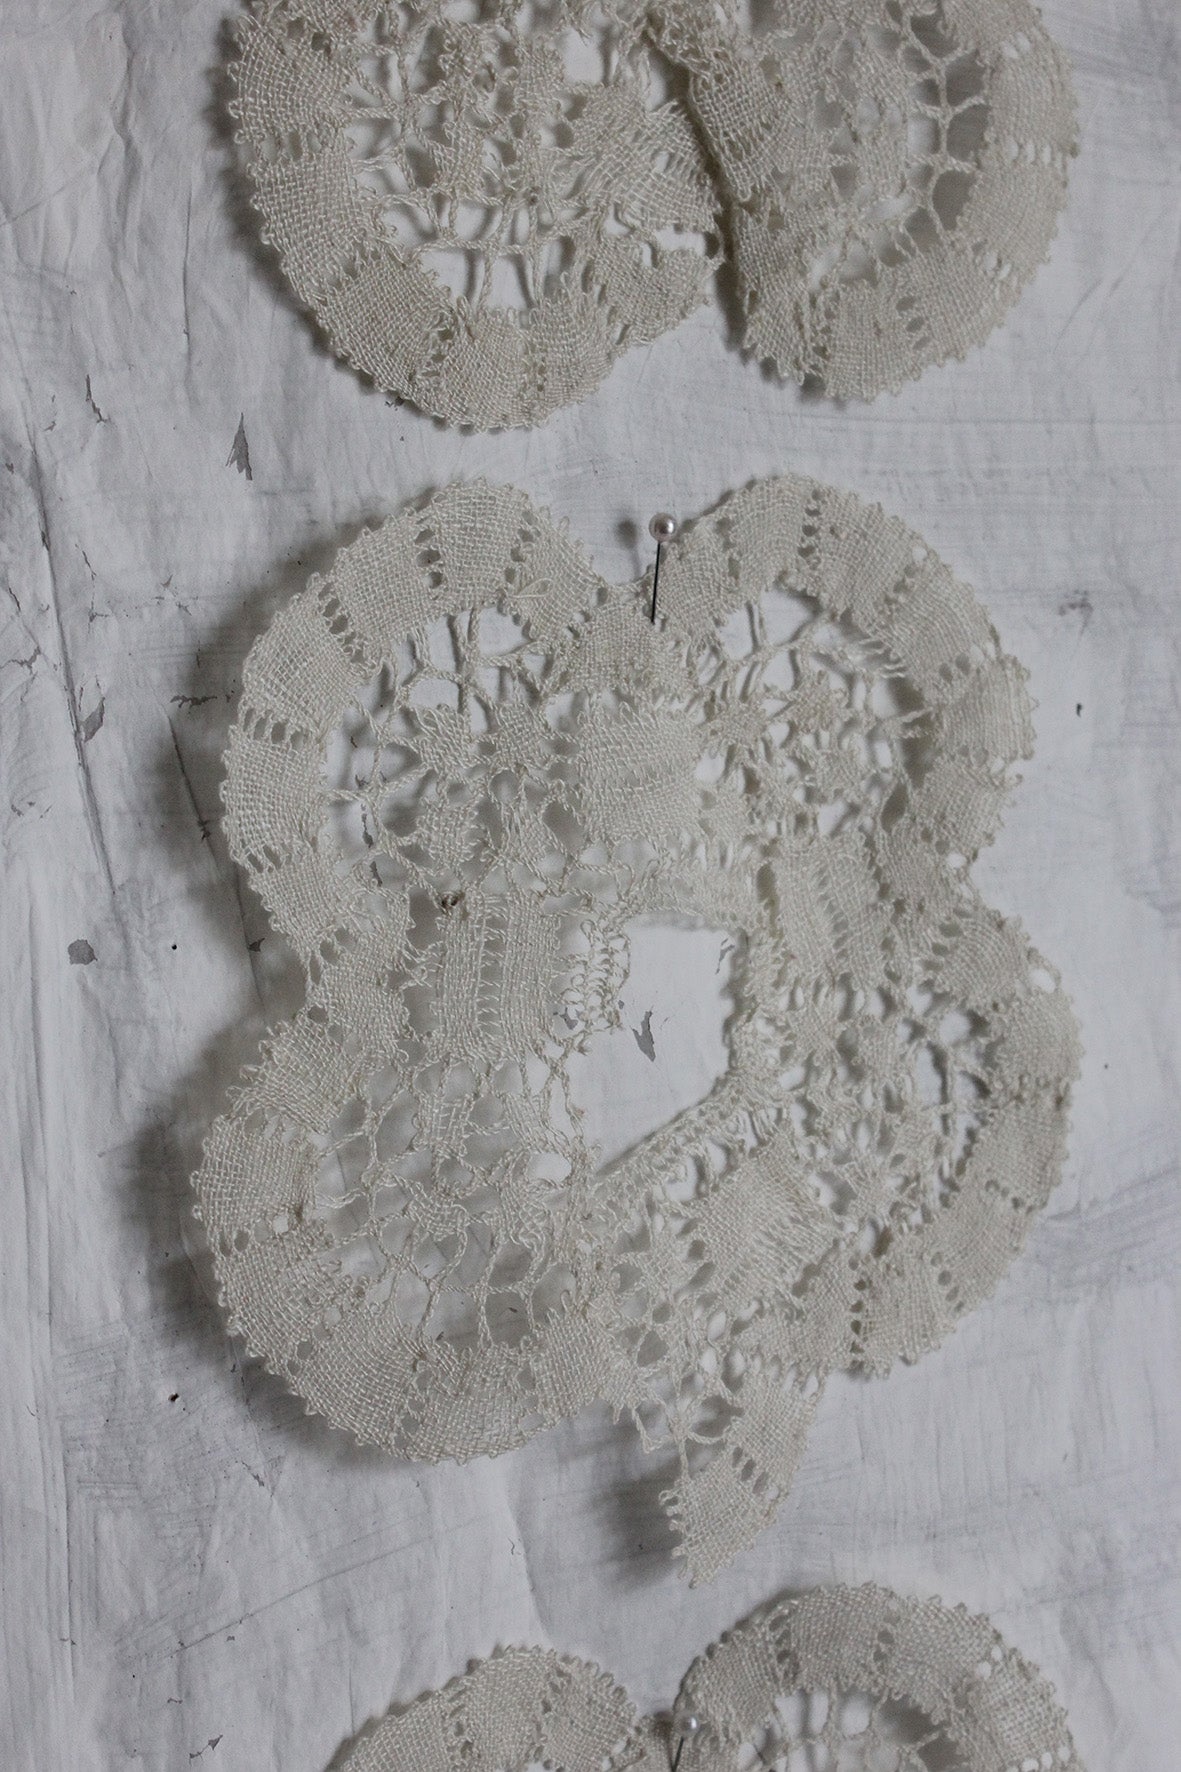 A Trio of Old Lace Unfinished Doilies